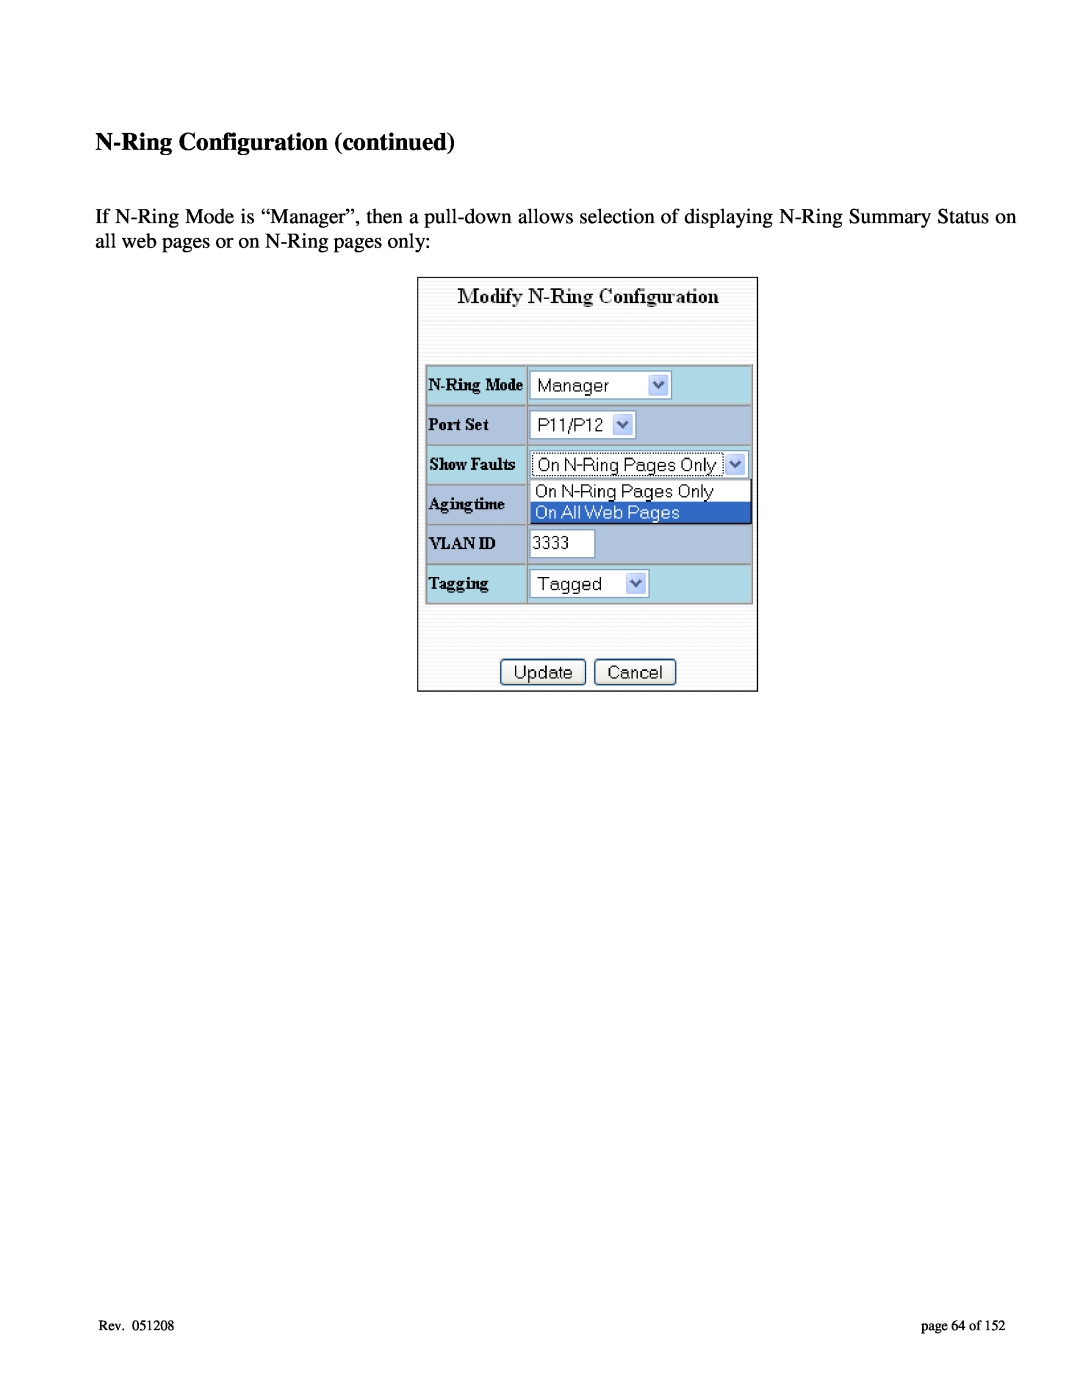 Gigabyte 7014 user manual N-Ring Configuration continued, page 64 of 